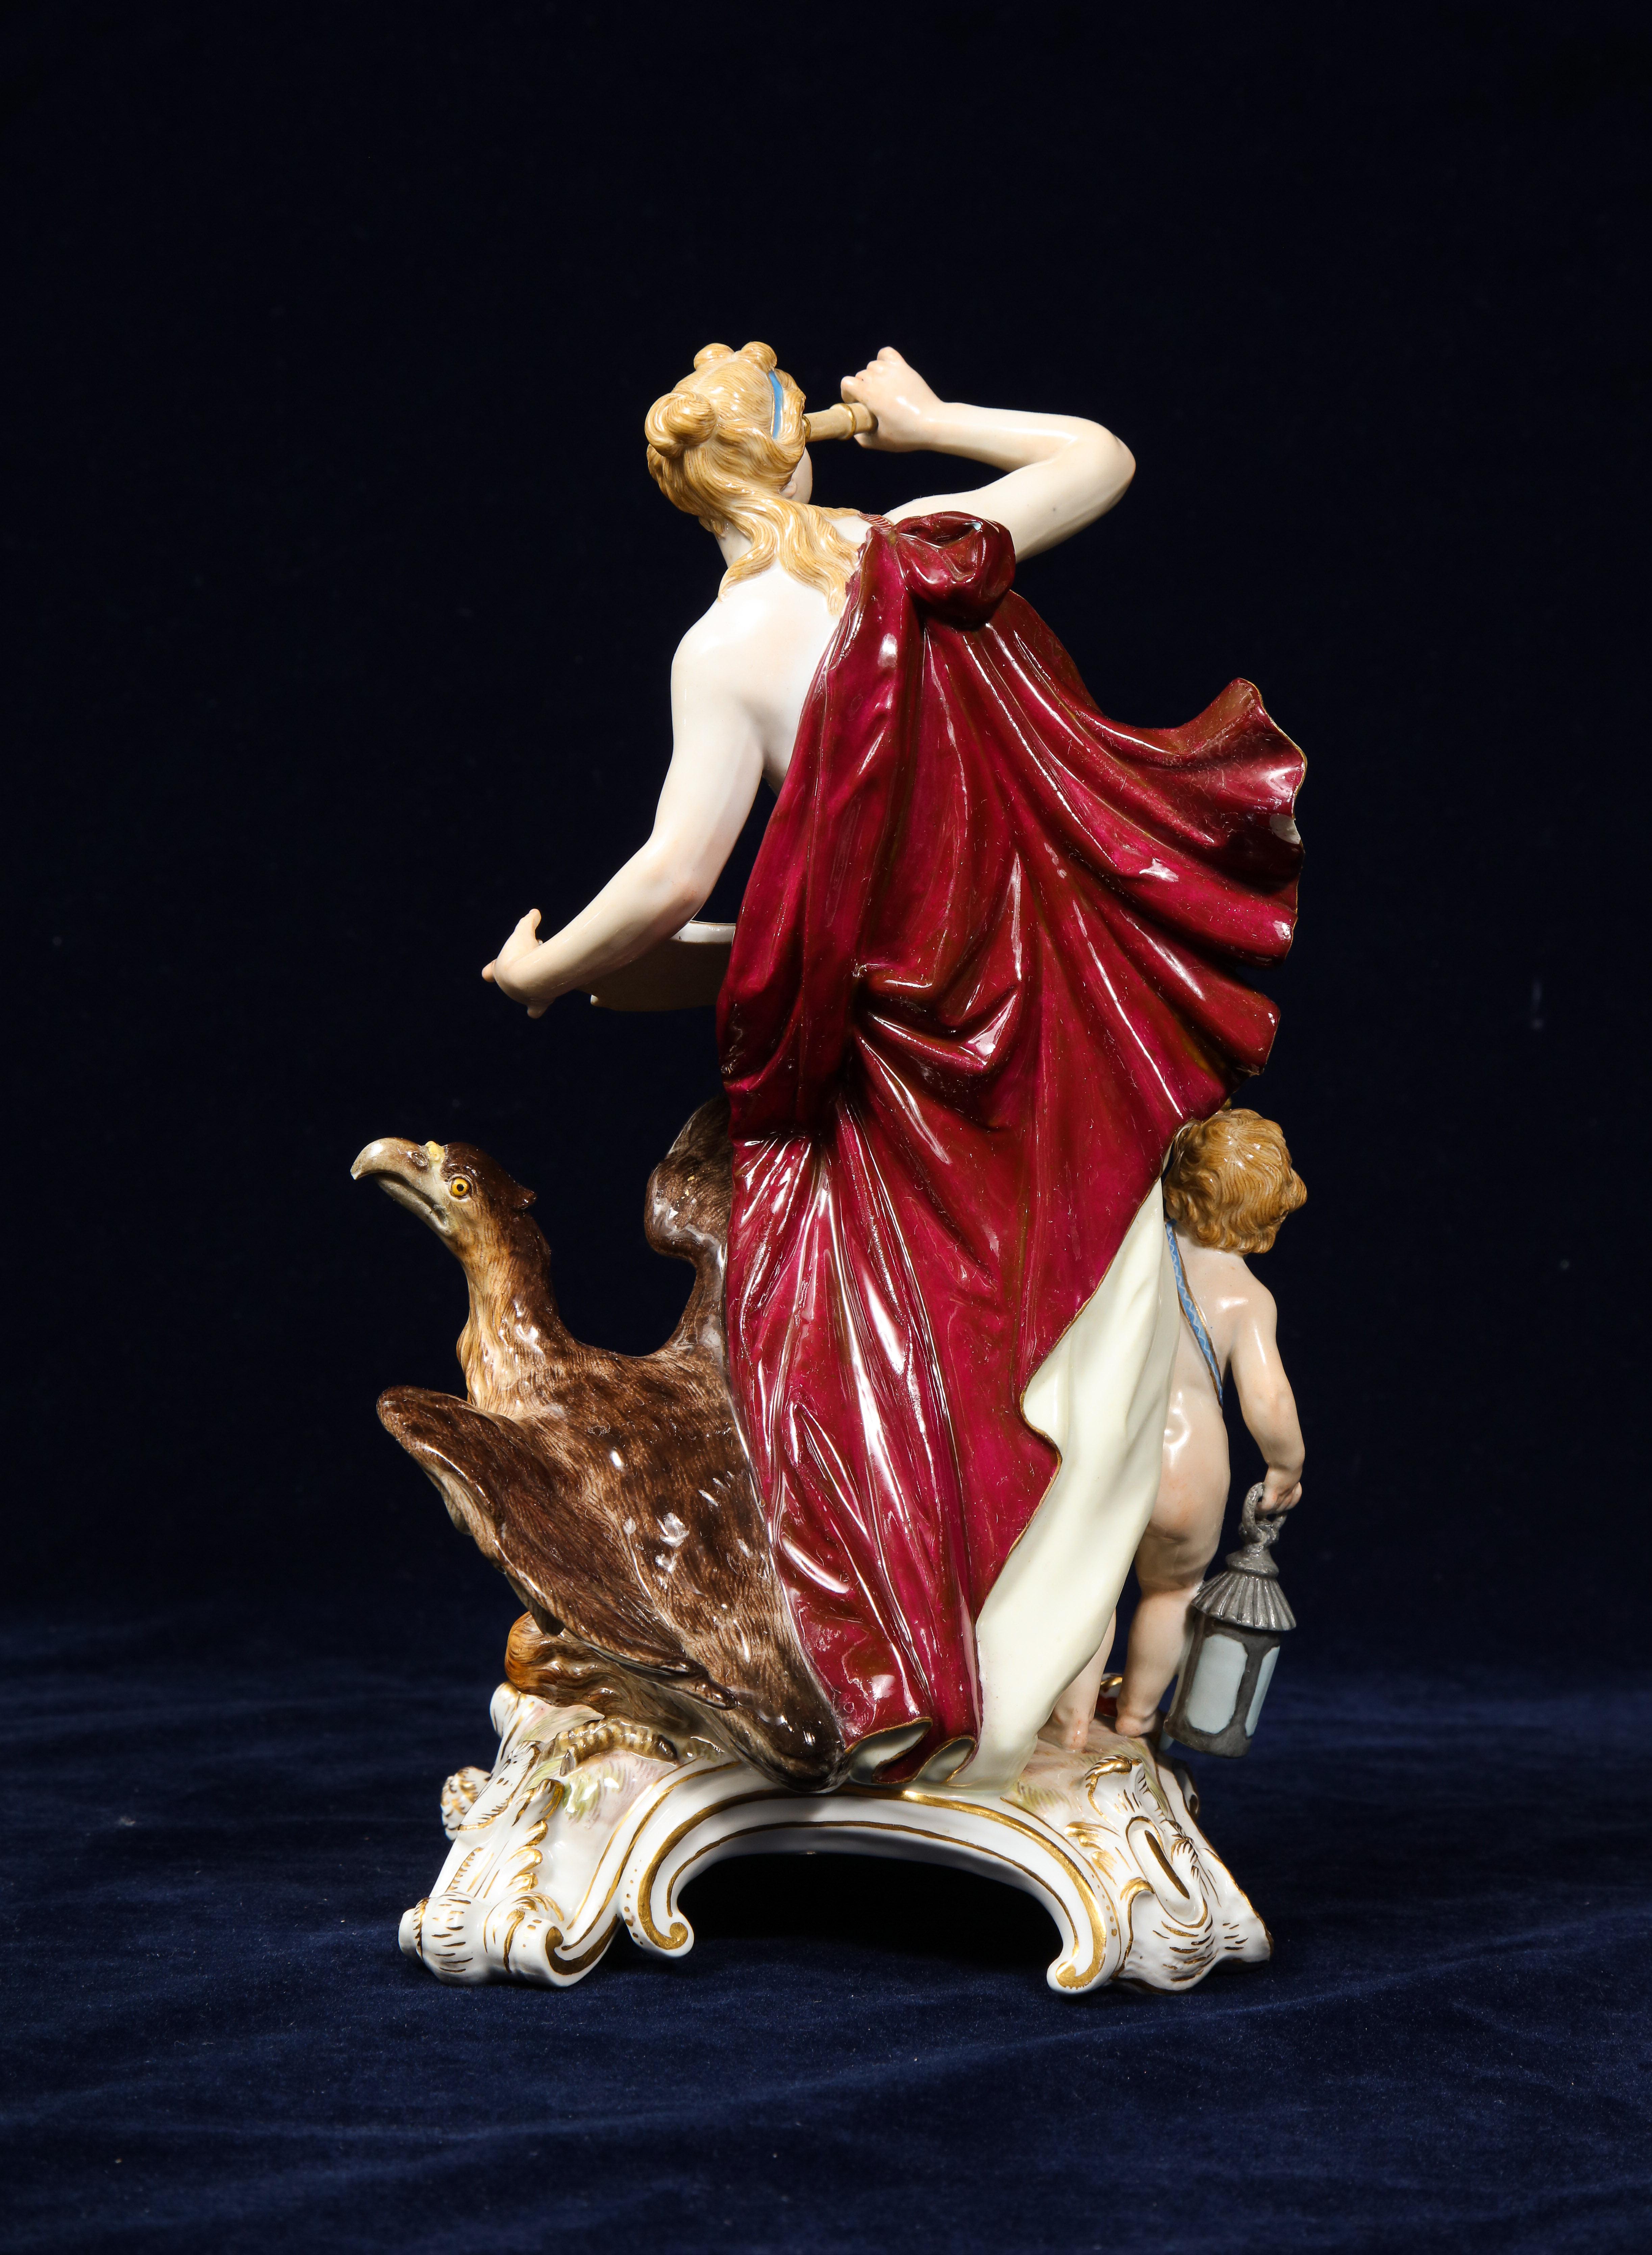 Set of 5 Meissen Figures Emblematic of the Senses by J.J. Kändler and Eberlein For Sale 1